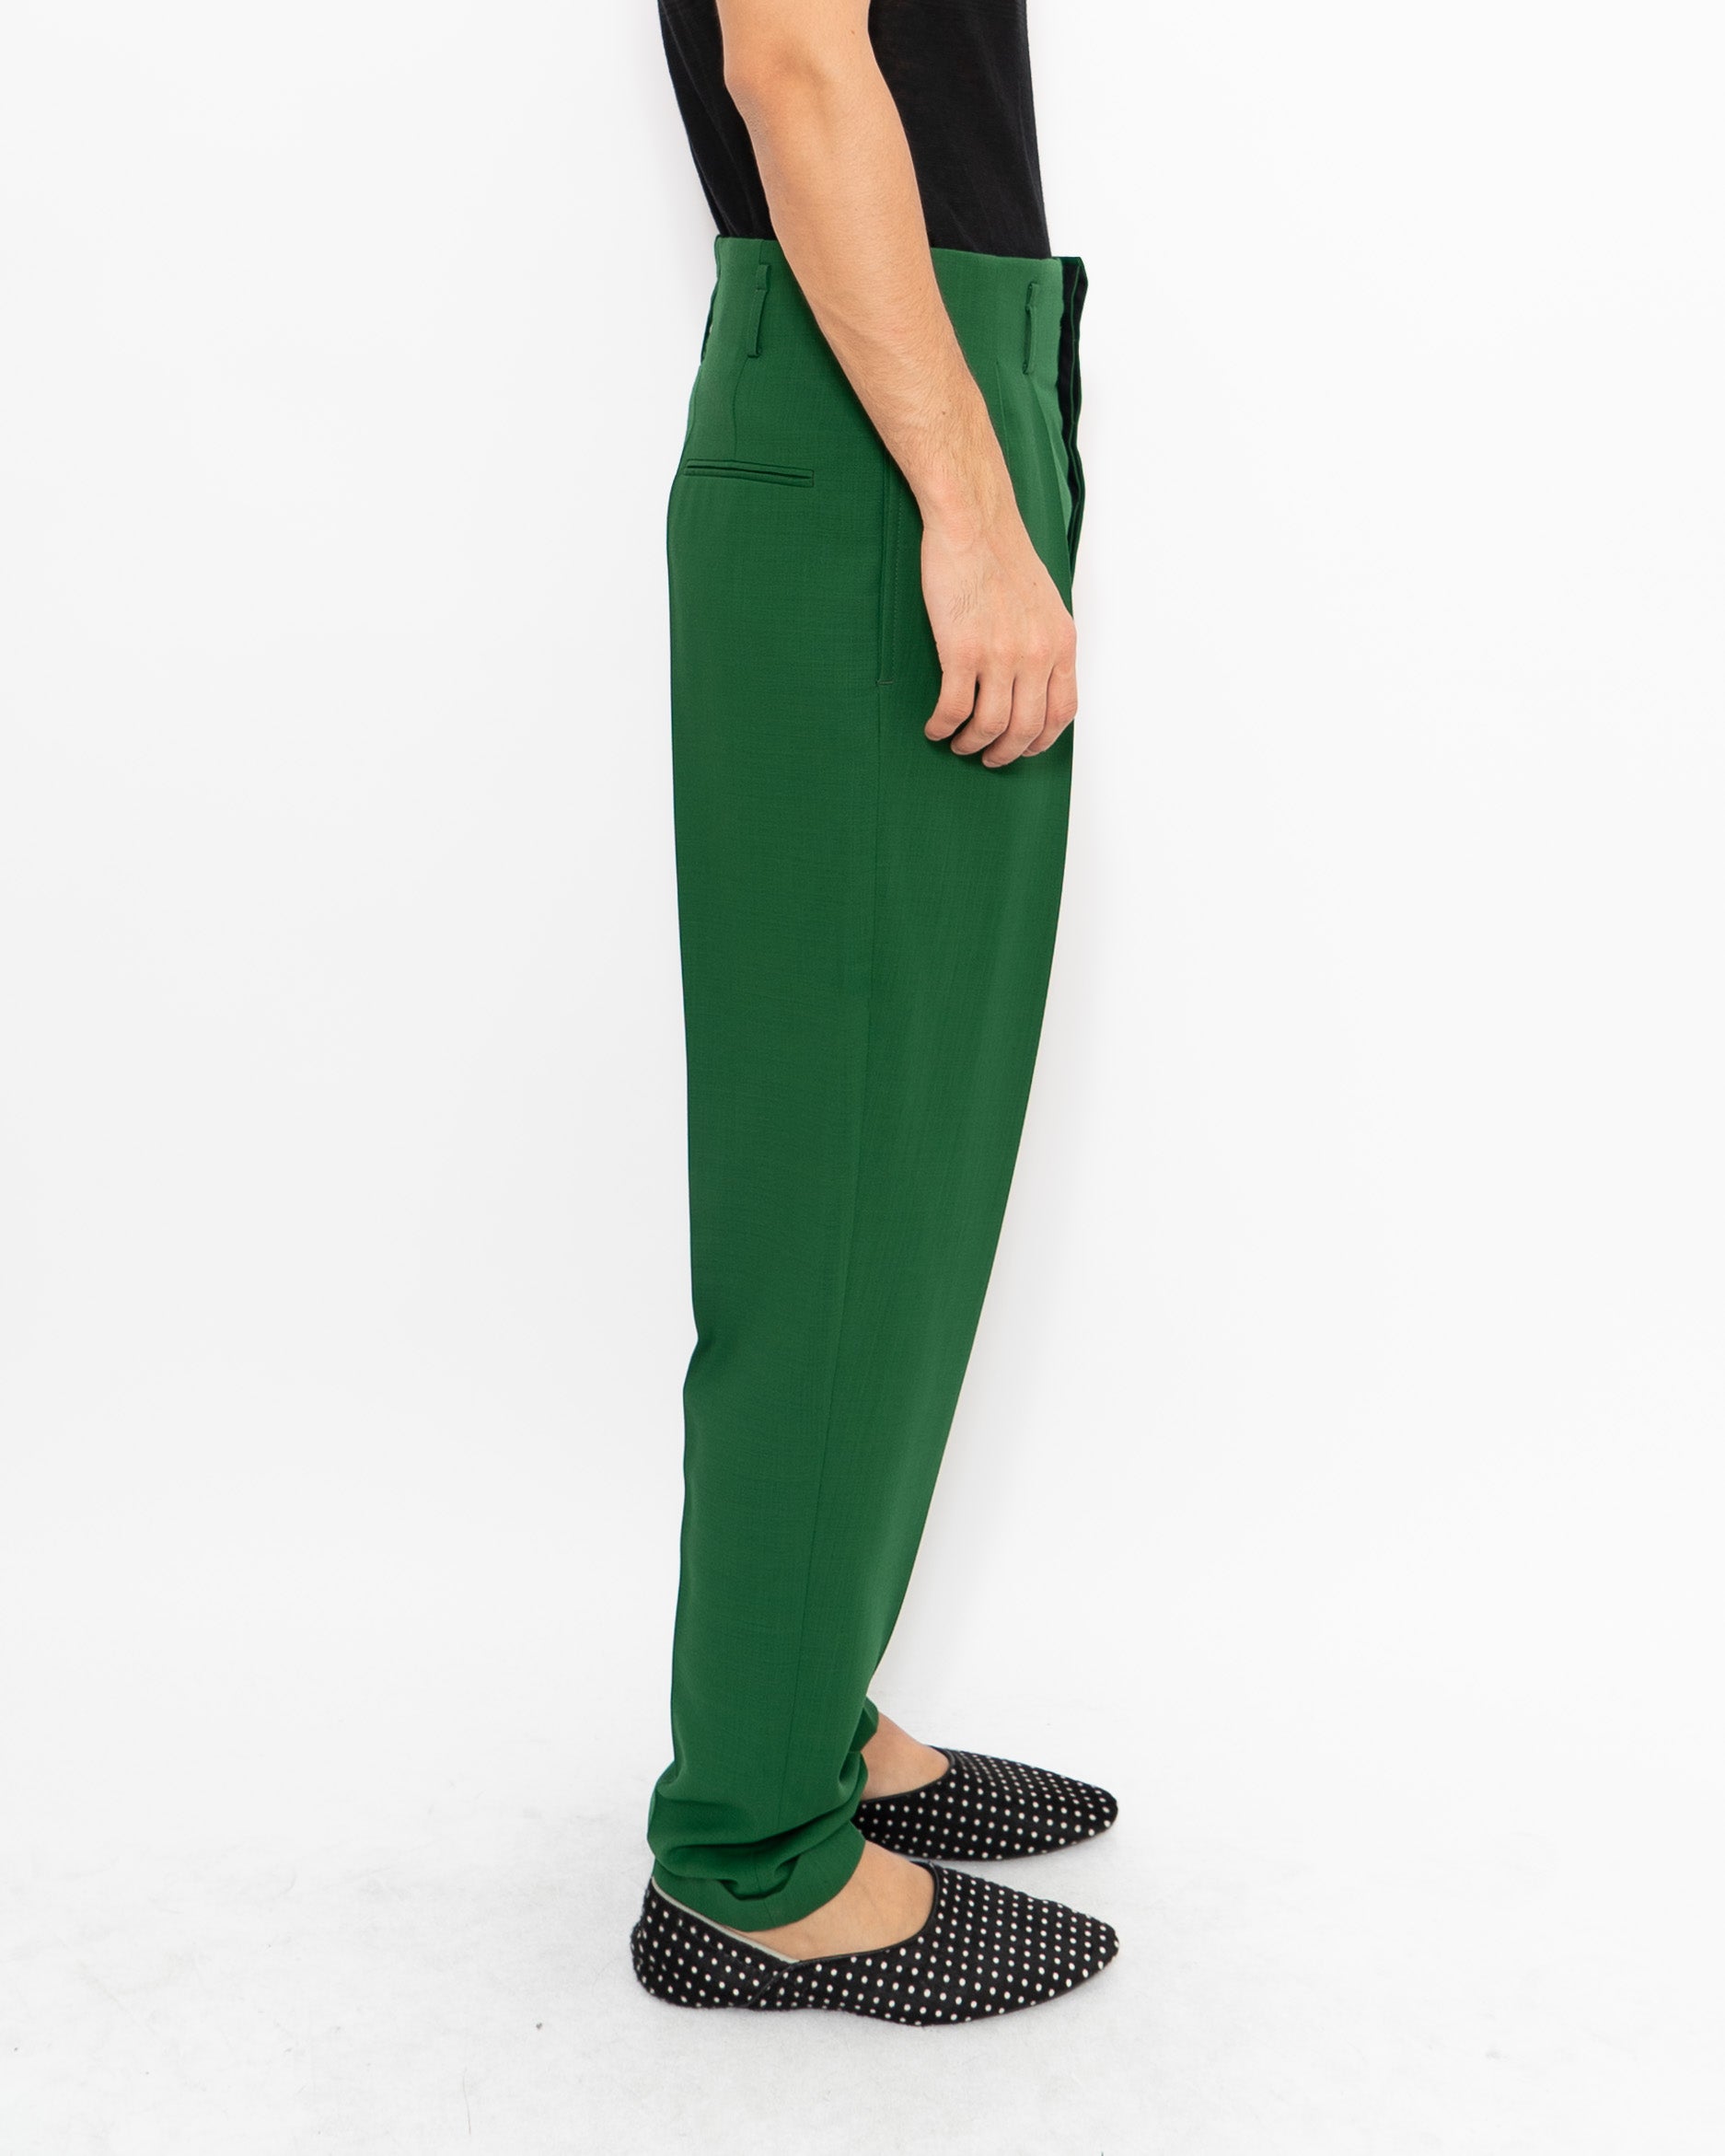 SS19 Pleated Green Wool Trousers Sample